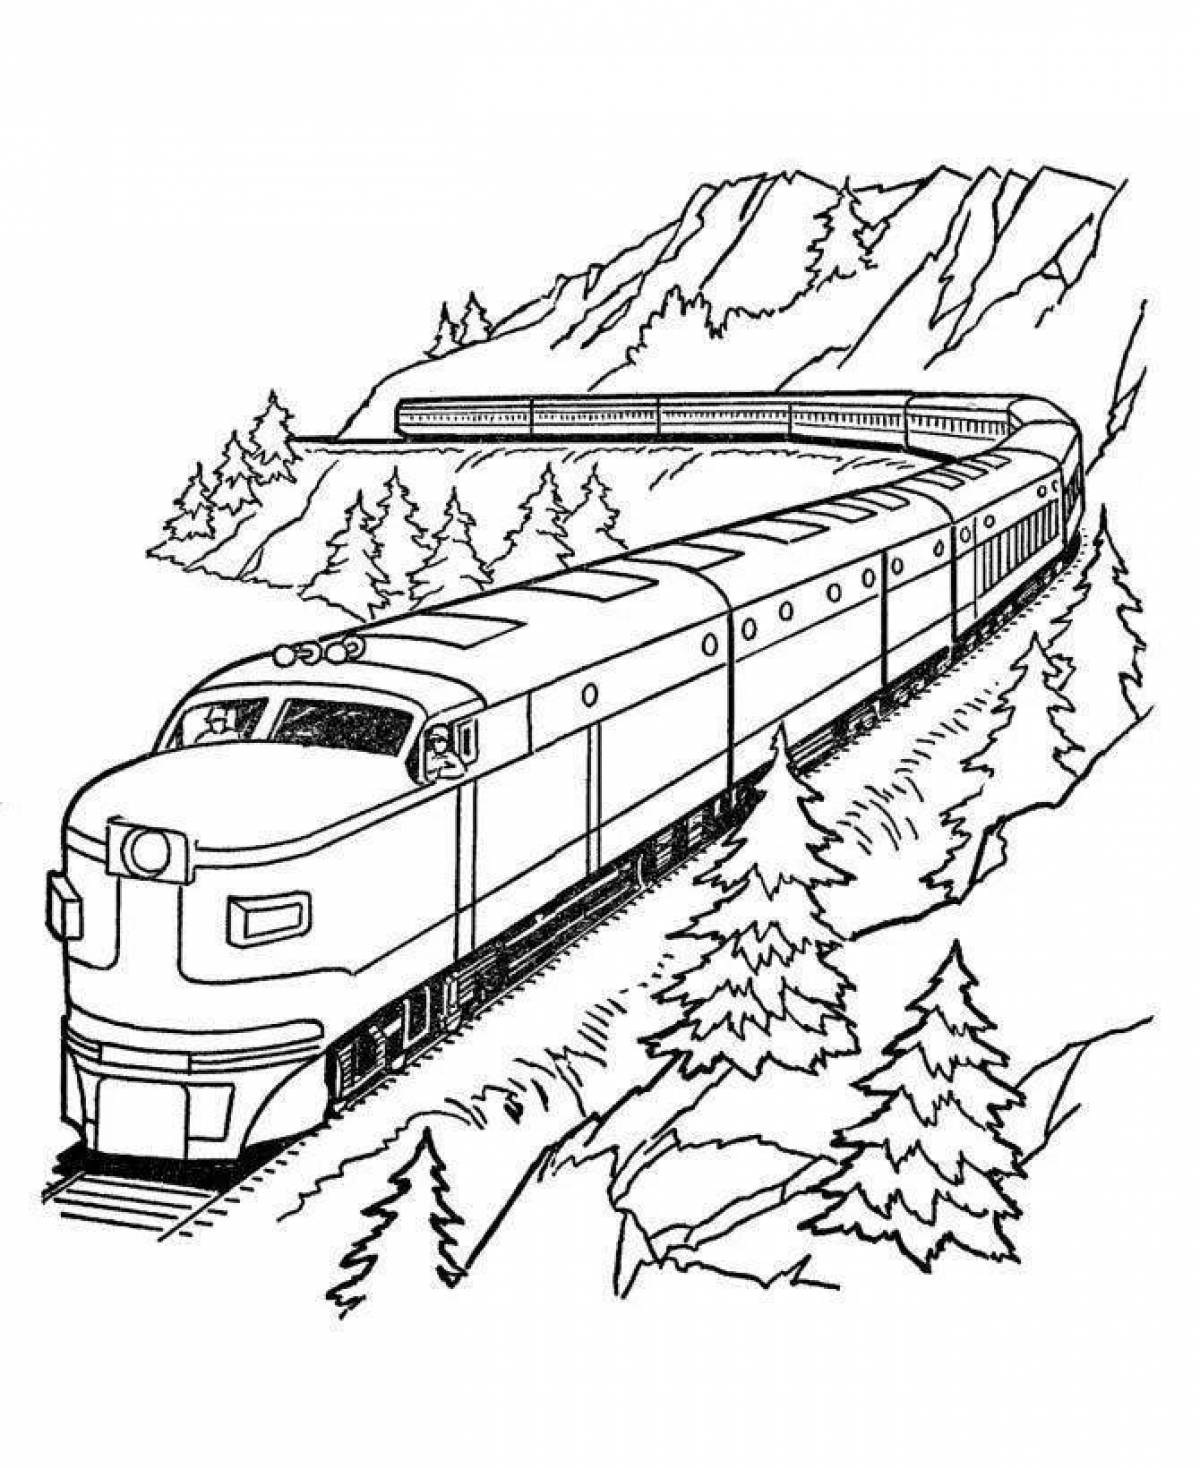 Coloring page for an electric locomotive